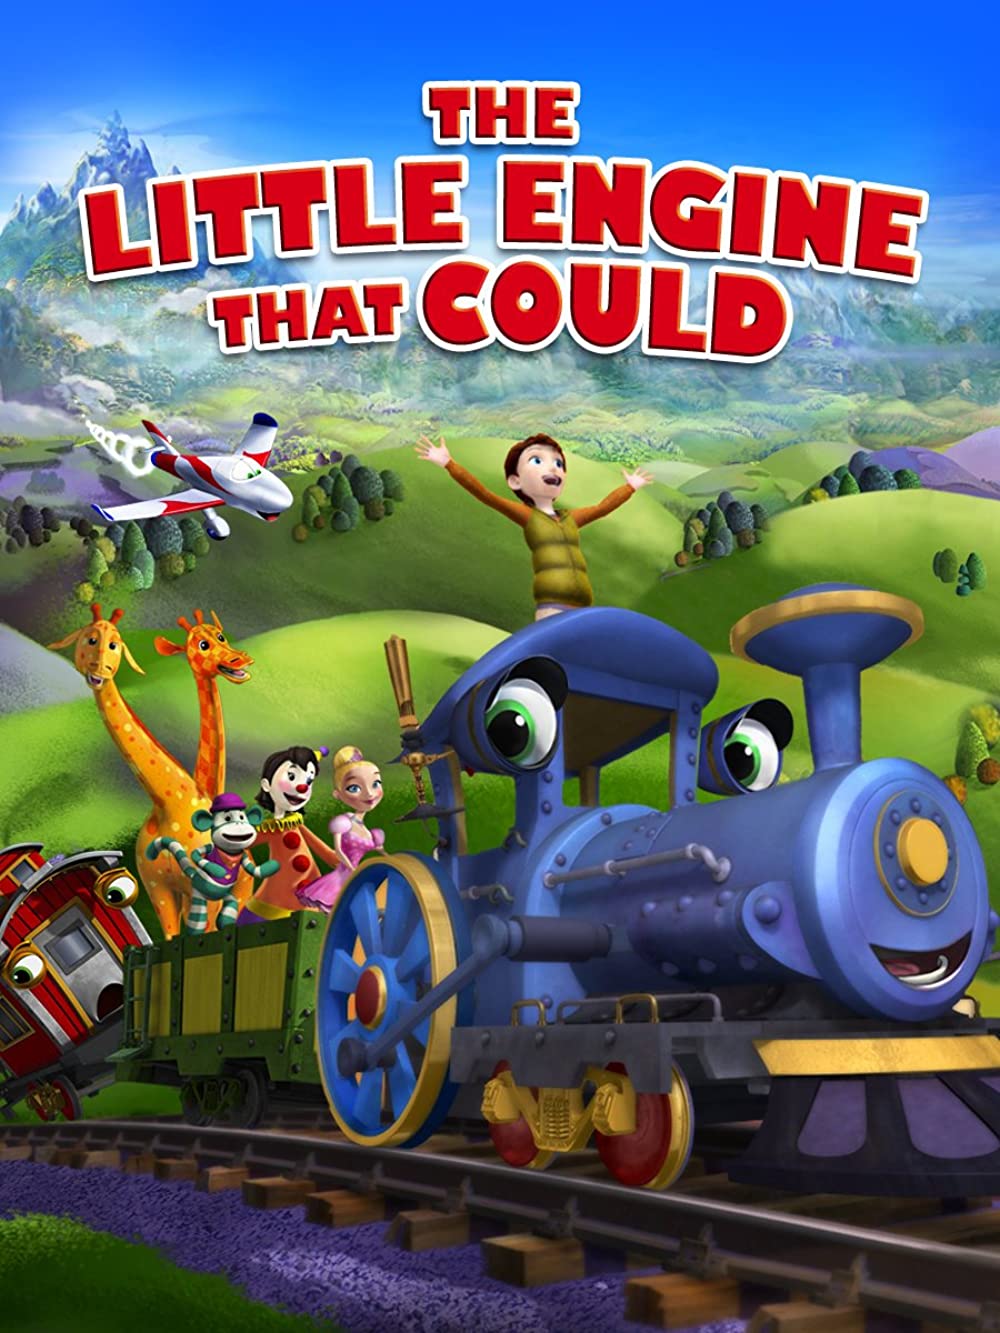 Download The Little Engine That Could Movie | The Little Engine That Could Movie Online